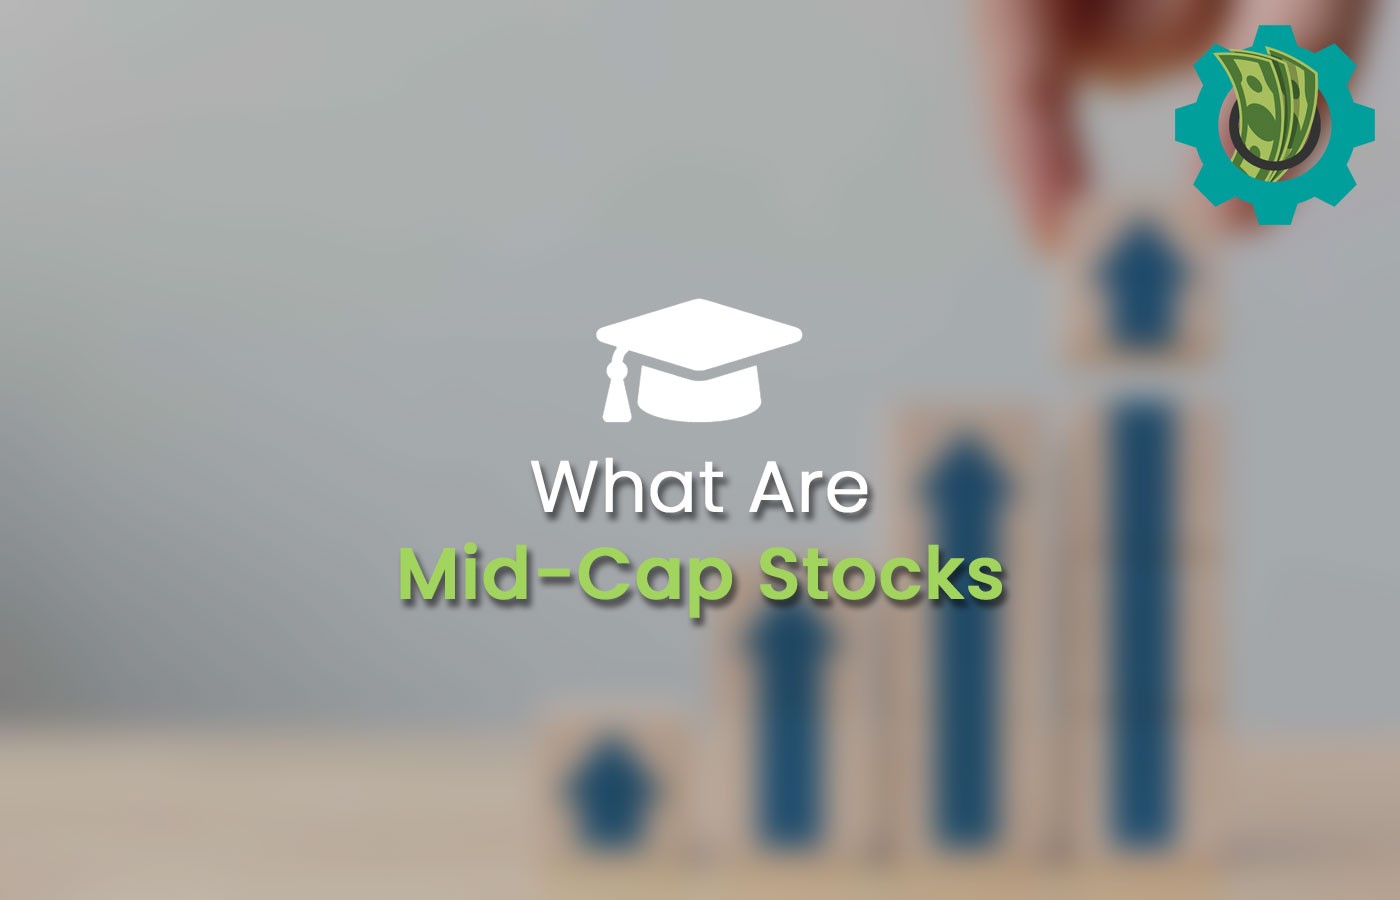 Investor deciding whether to invest in mid-cap stocks